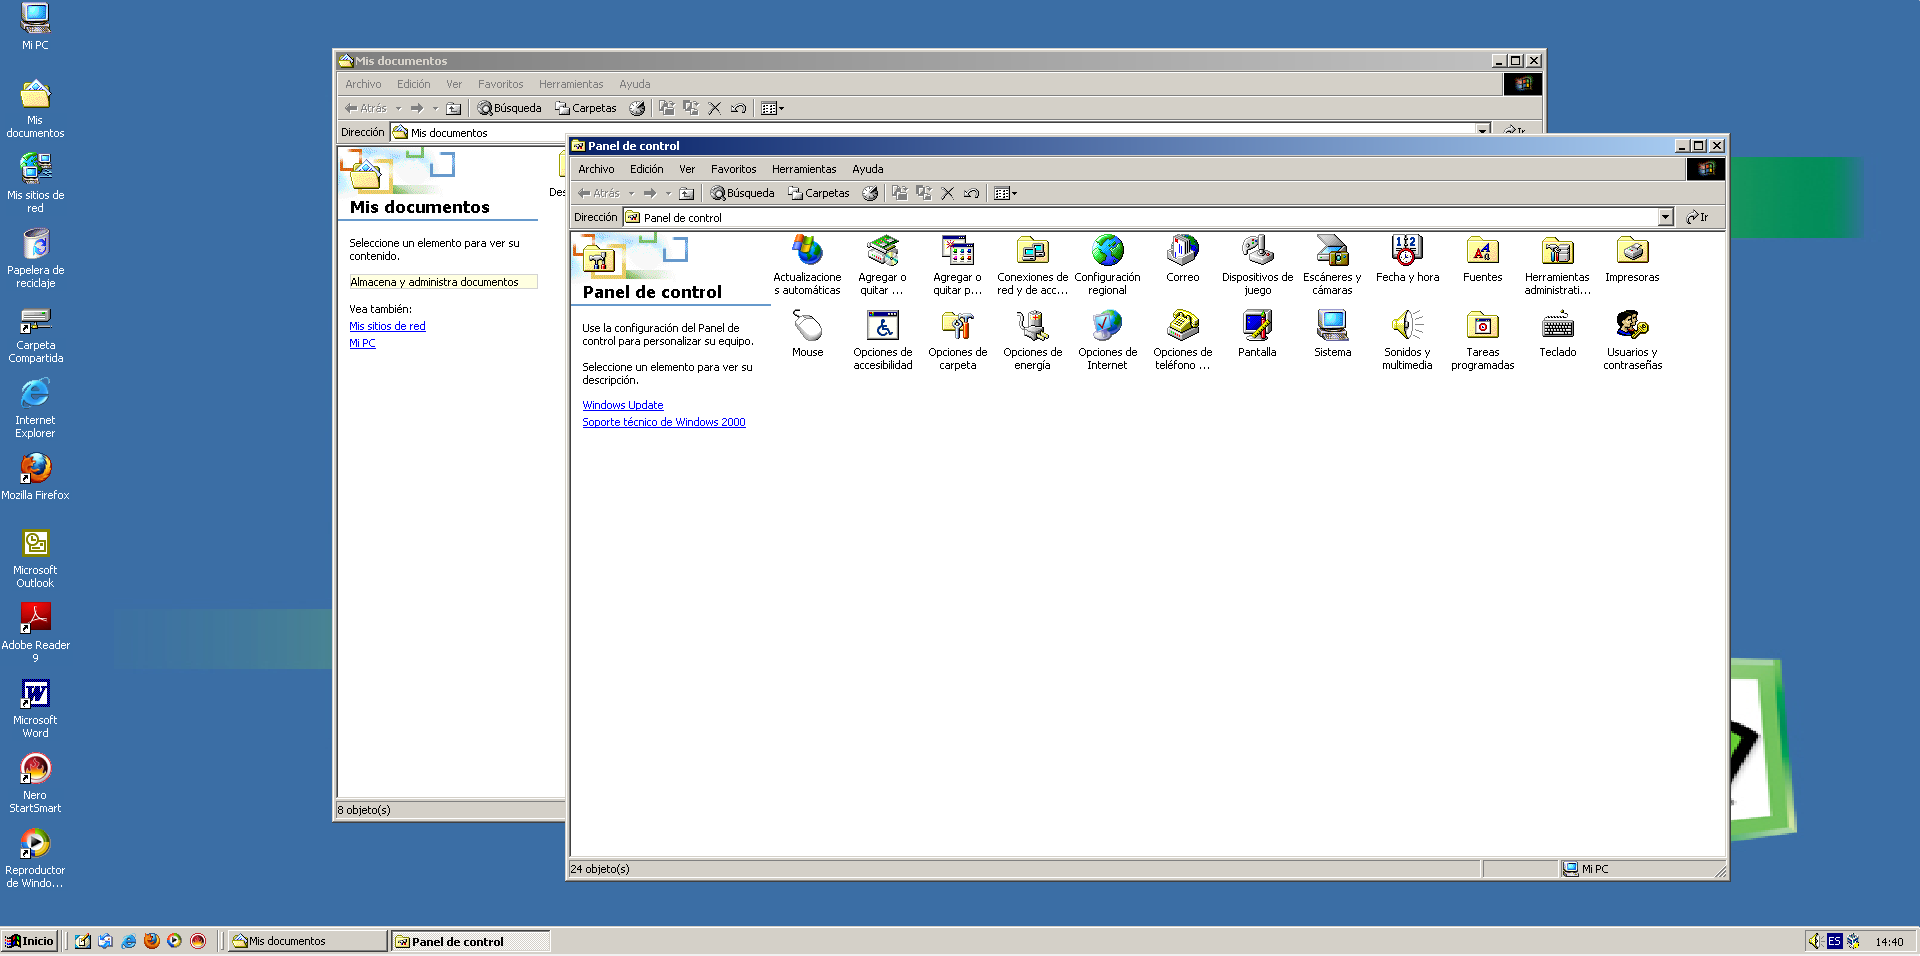 windows 2000 professional sp4 iso free download